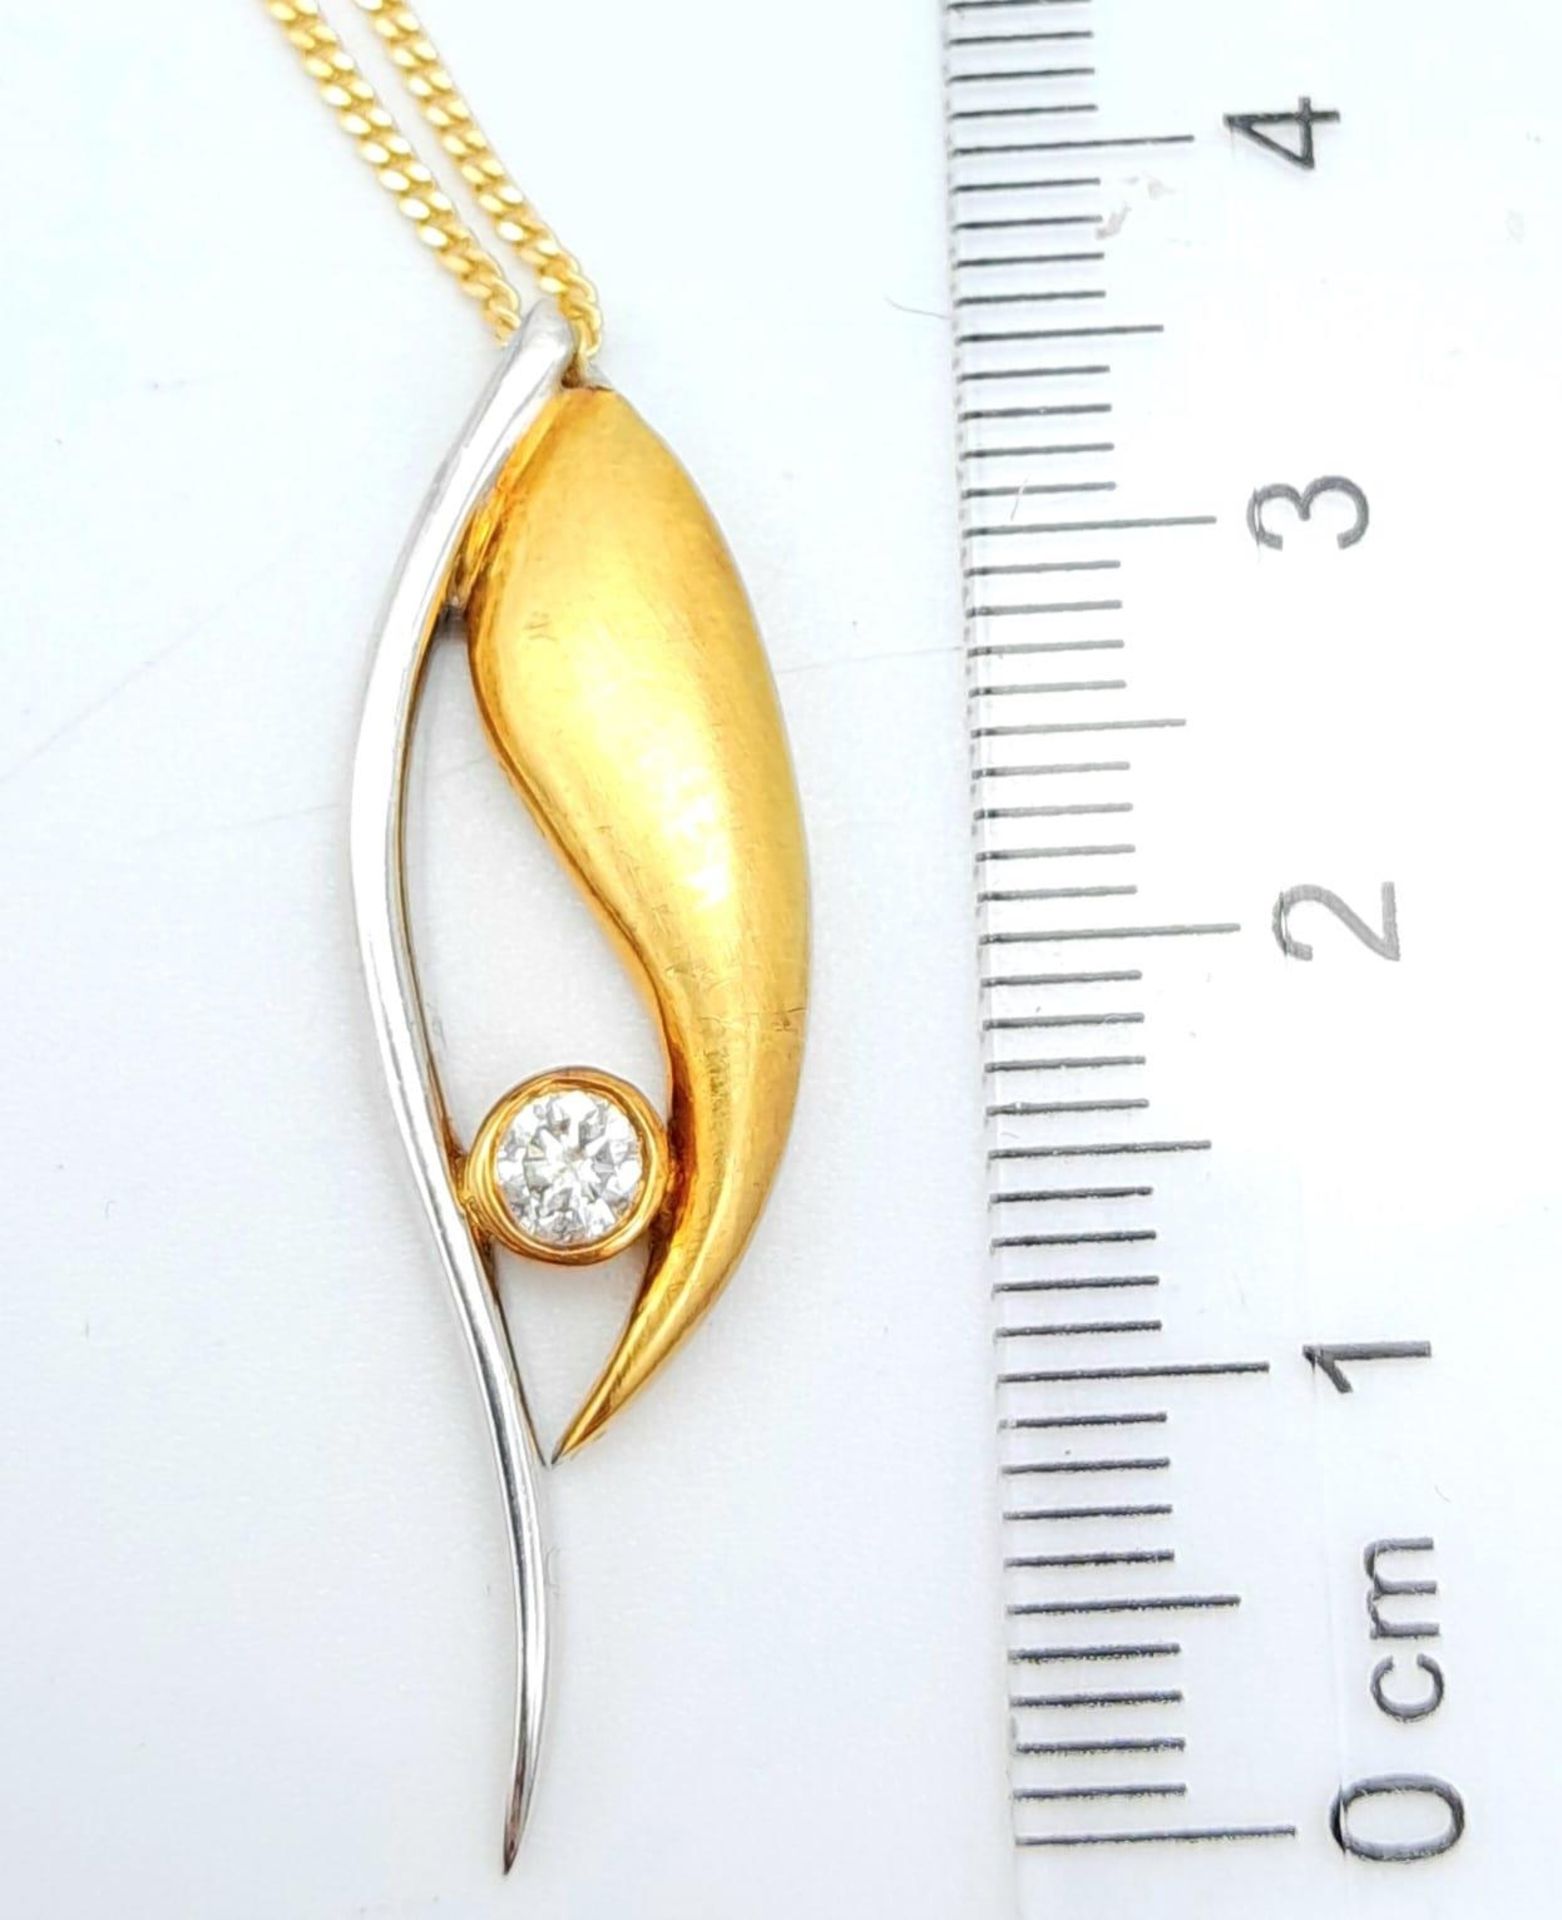 An 18K Bi Colour Gold Diamond Pendant on an 18K Yellow Gold Disappearing Necklace. 0.15ct diamond. - Image 6 of 11